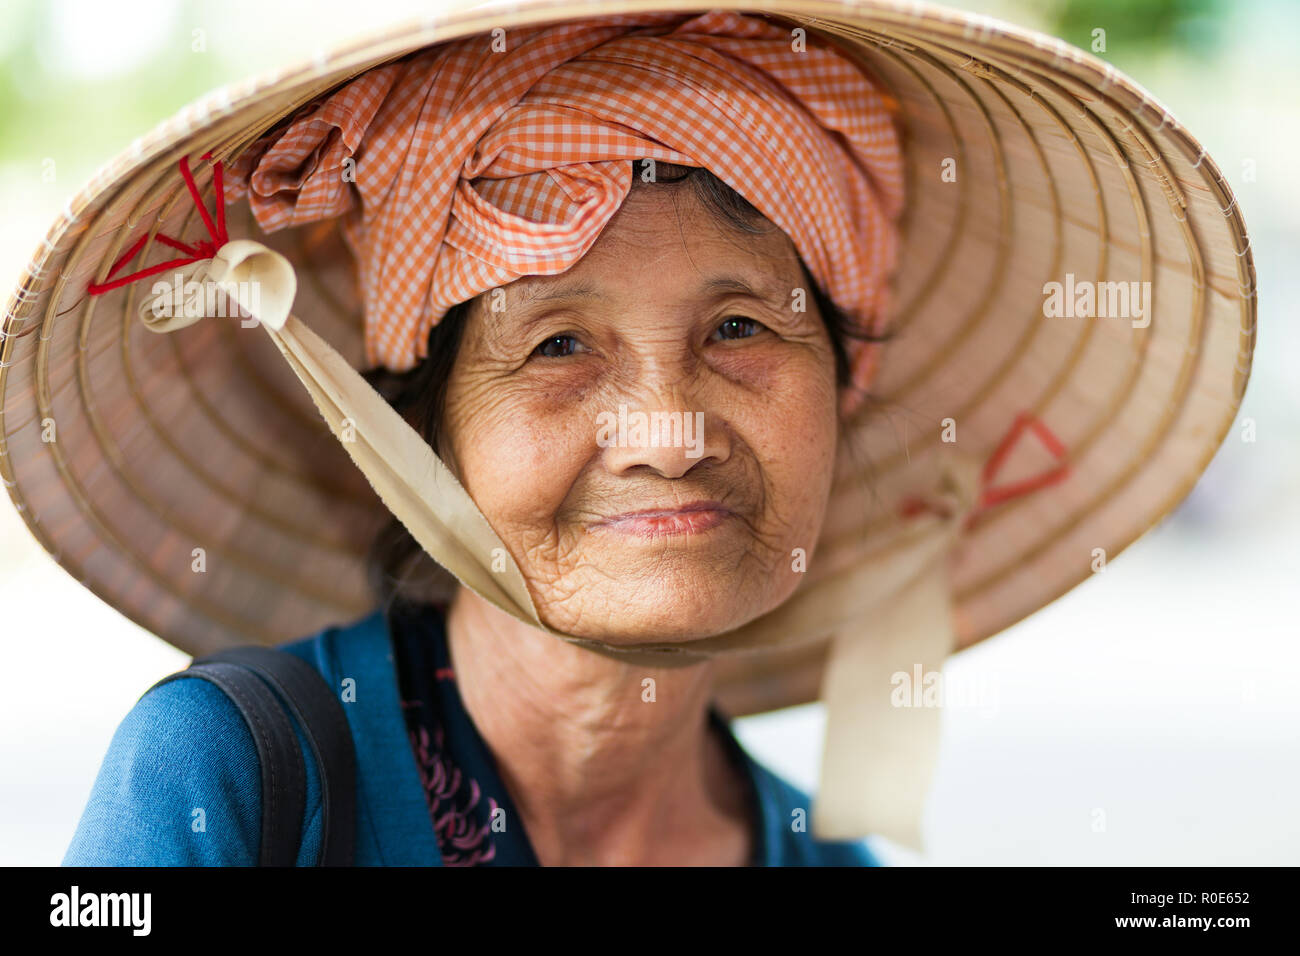 HO CHI MINH CITY ( SAIGON ), VIETNAM, FEBRUARY 22, 2015 : Portrait of a cute elderly lady wearing a traditional conical hat in Ho Chi Minh city, Vietn Stock Photo